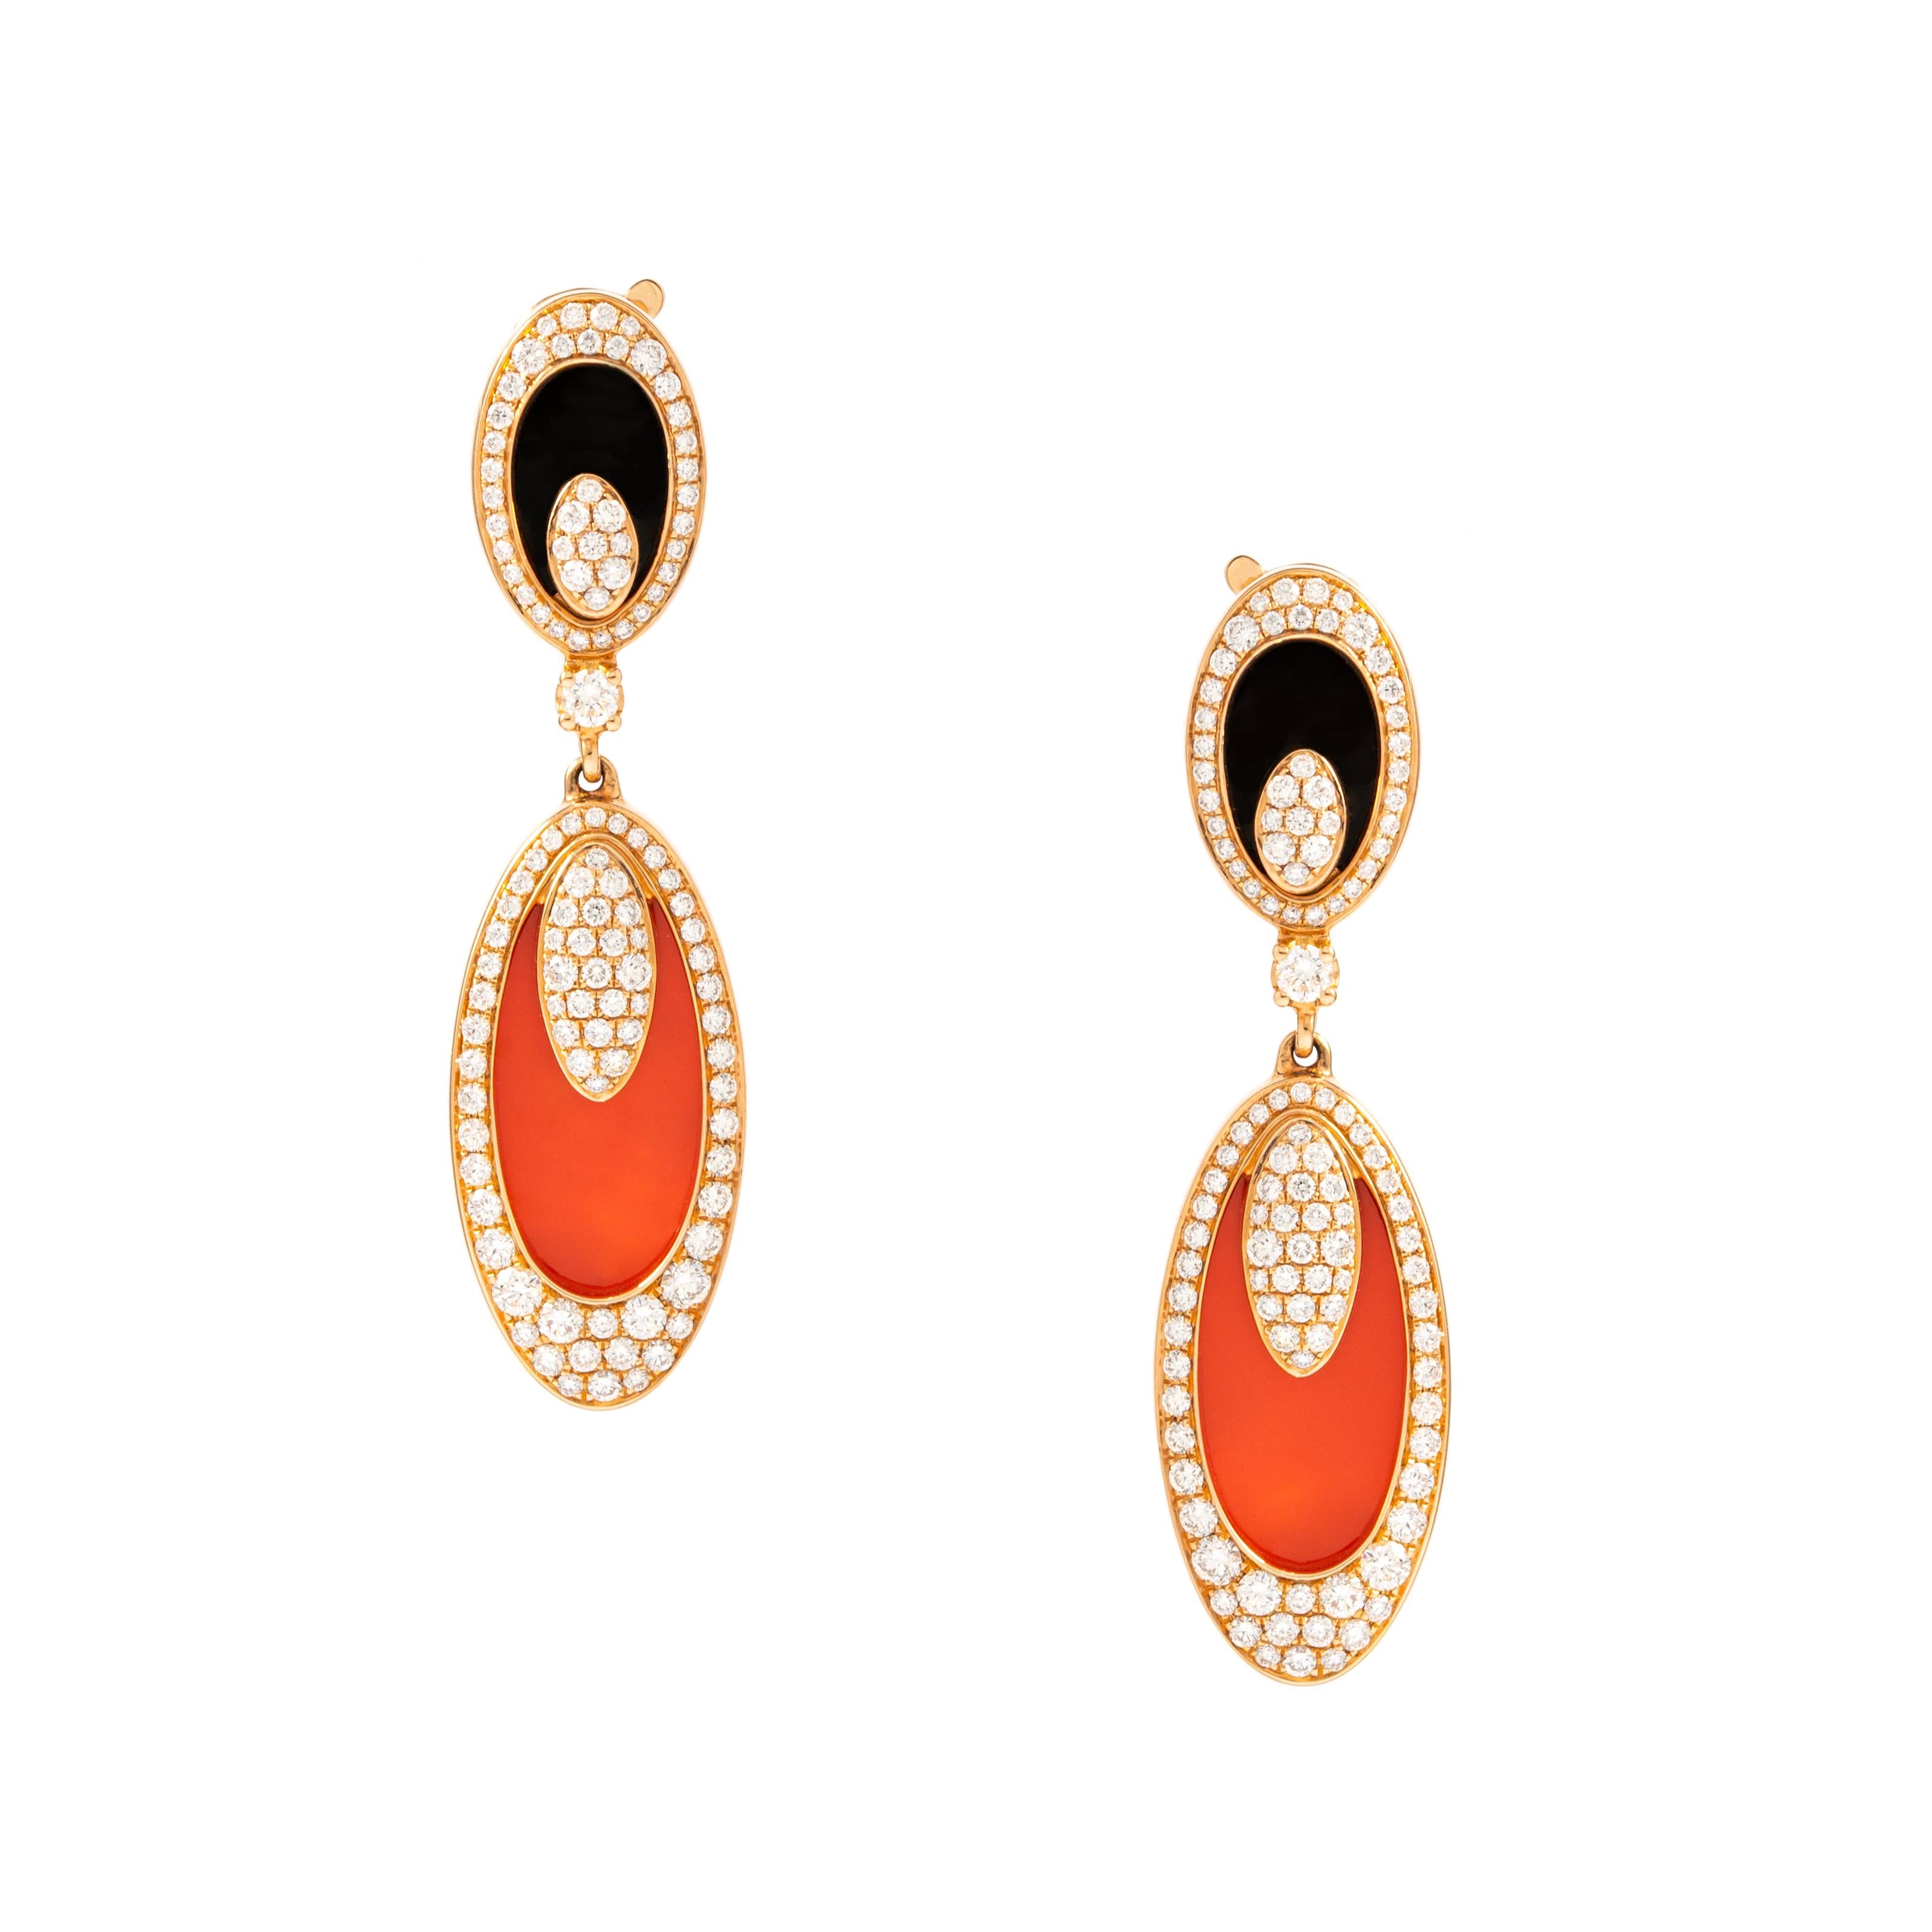 Earrings in 18kt pink gold set with 222 diamonds 1.61 cts, 2 onyx 1.05 cts and 2 coral 3.39 cts